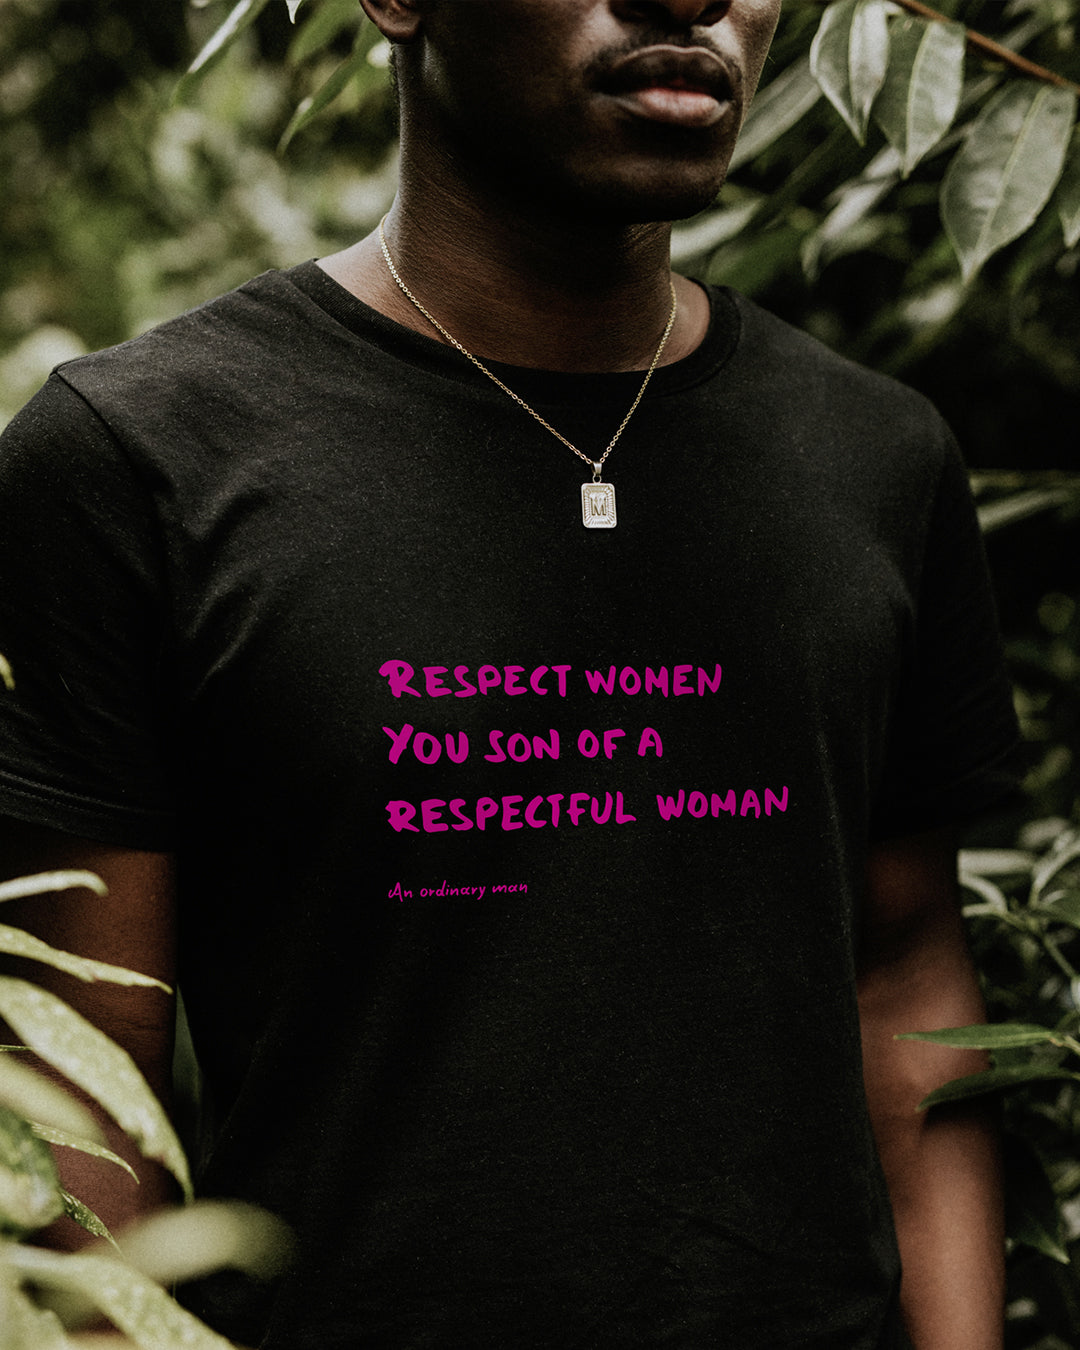 feminist witty quote on a t-shirt